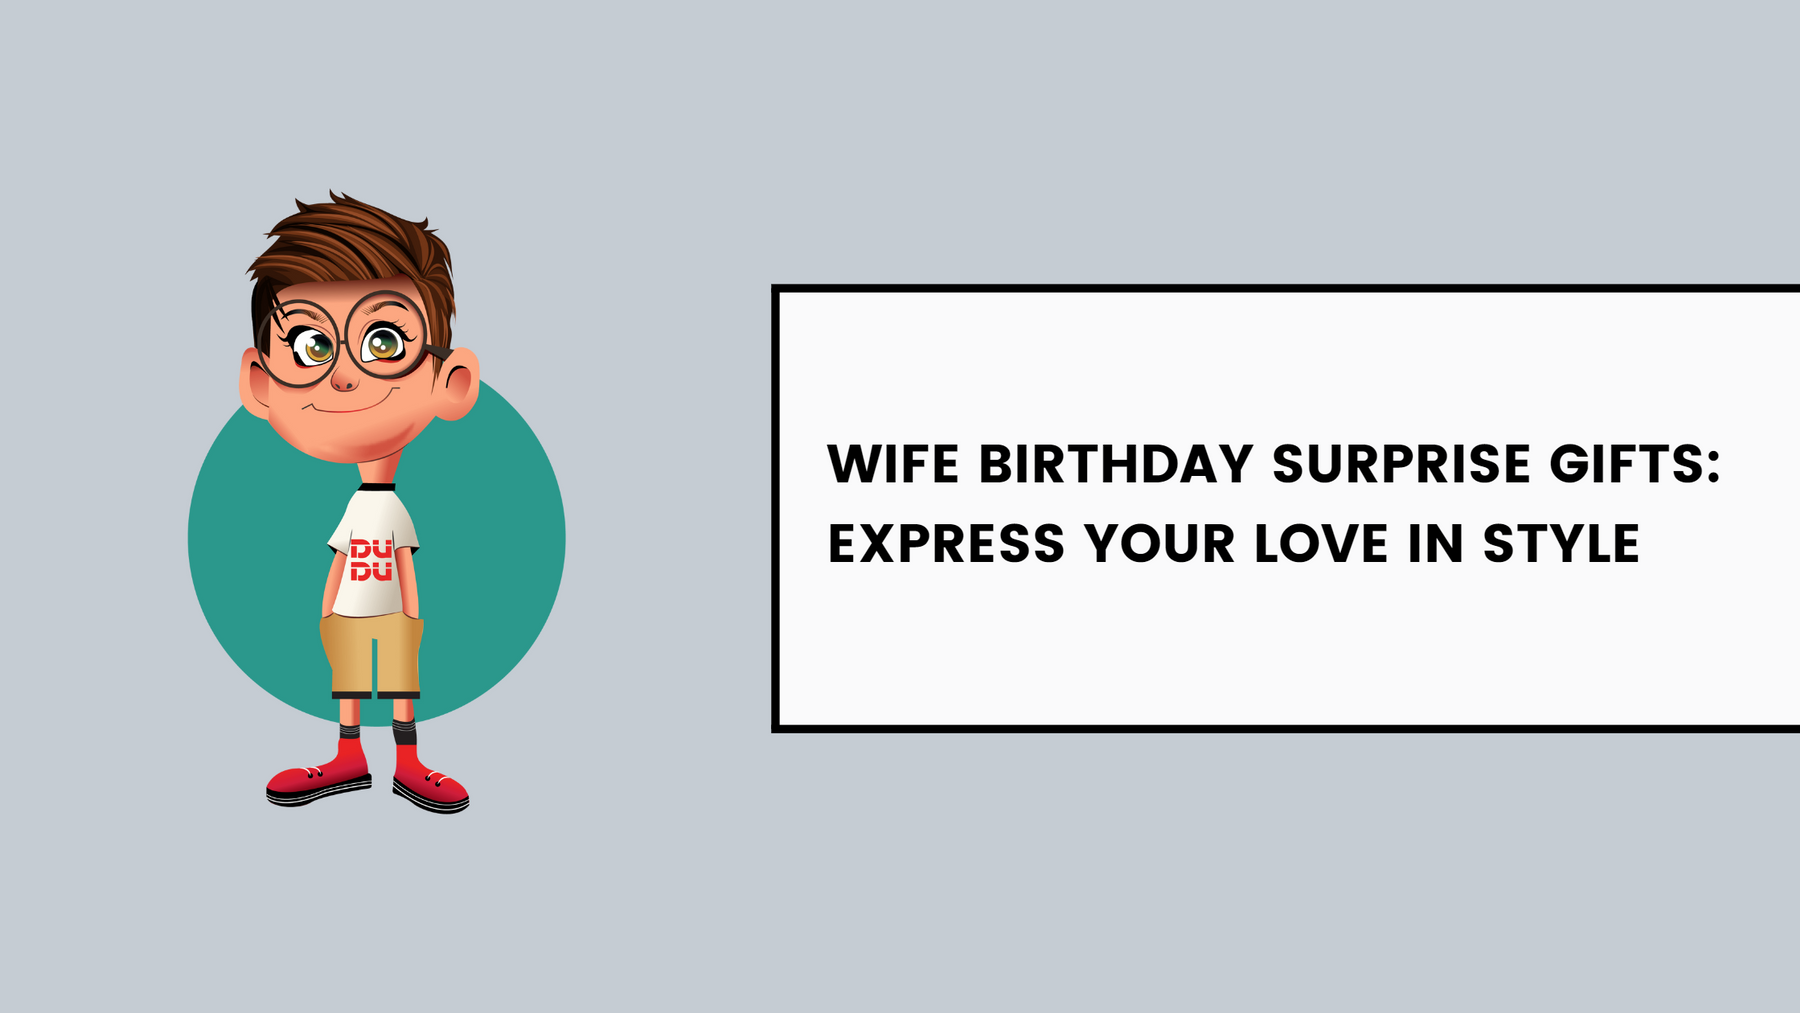 Wife Birthday Surprise Gifts: Express Your Love In Style